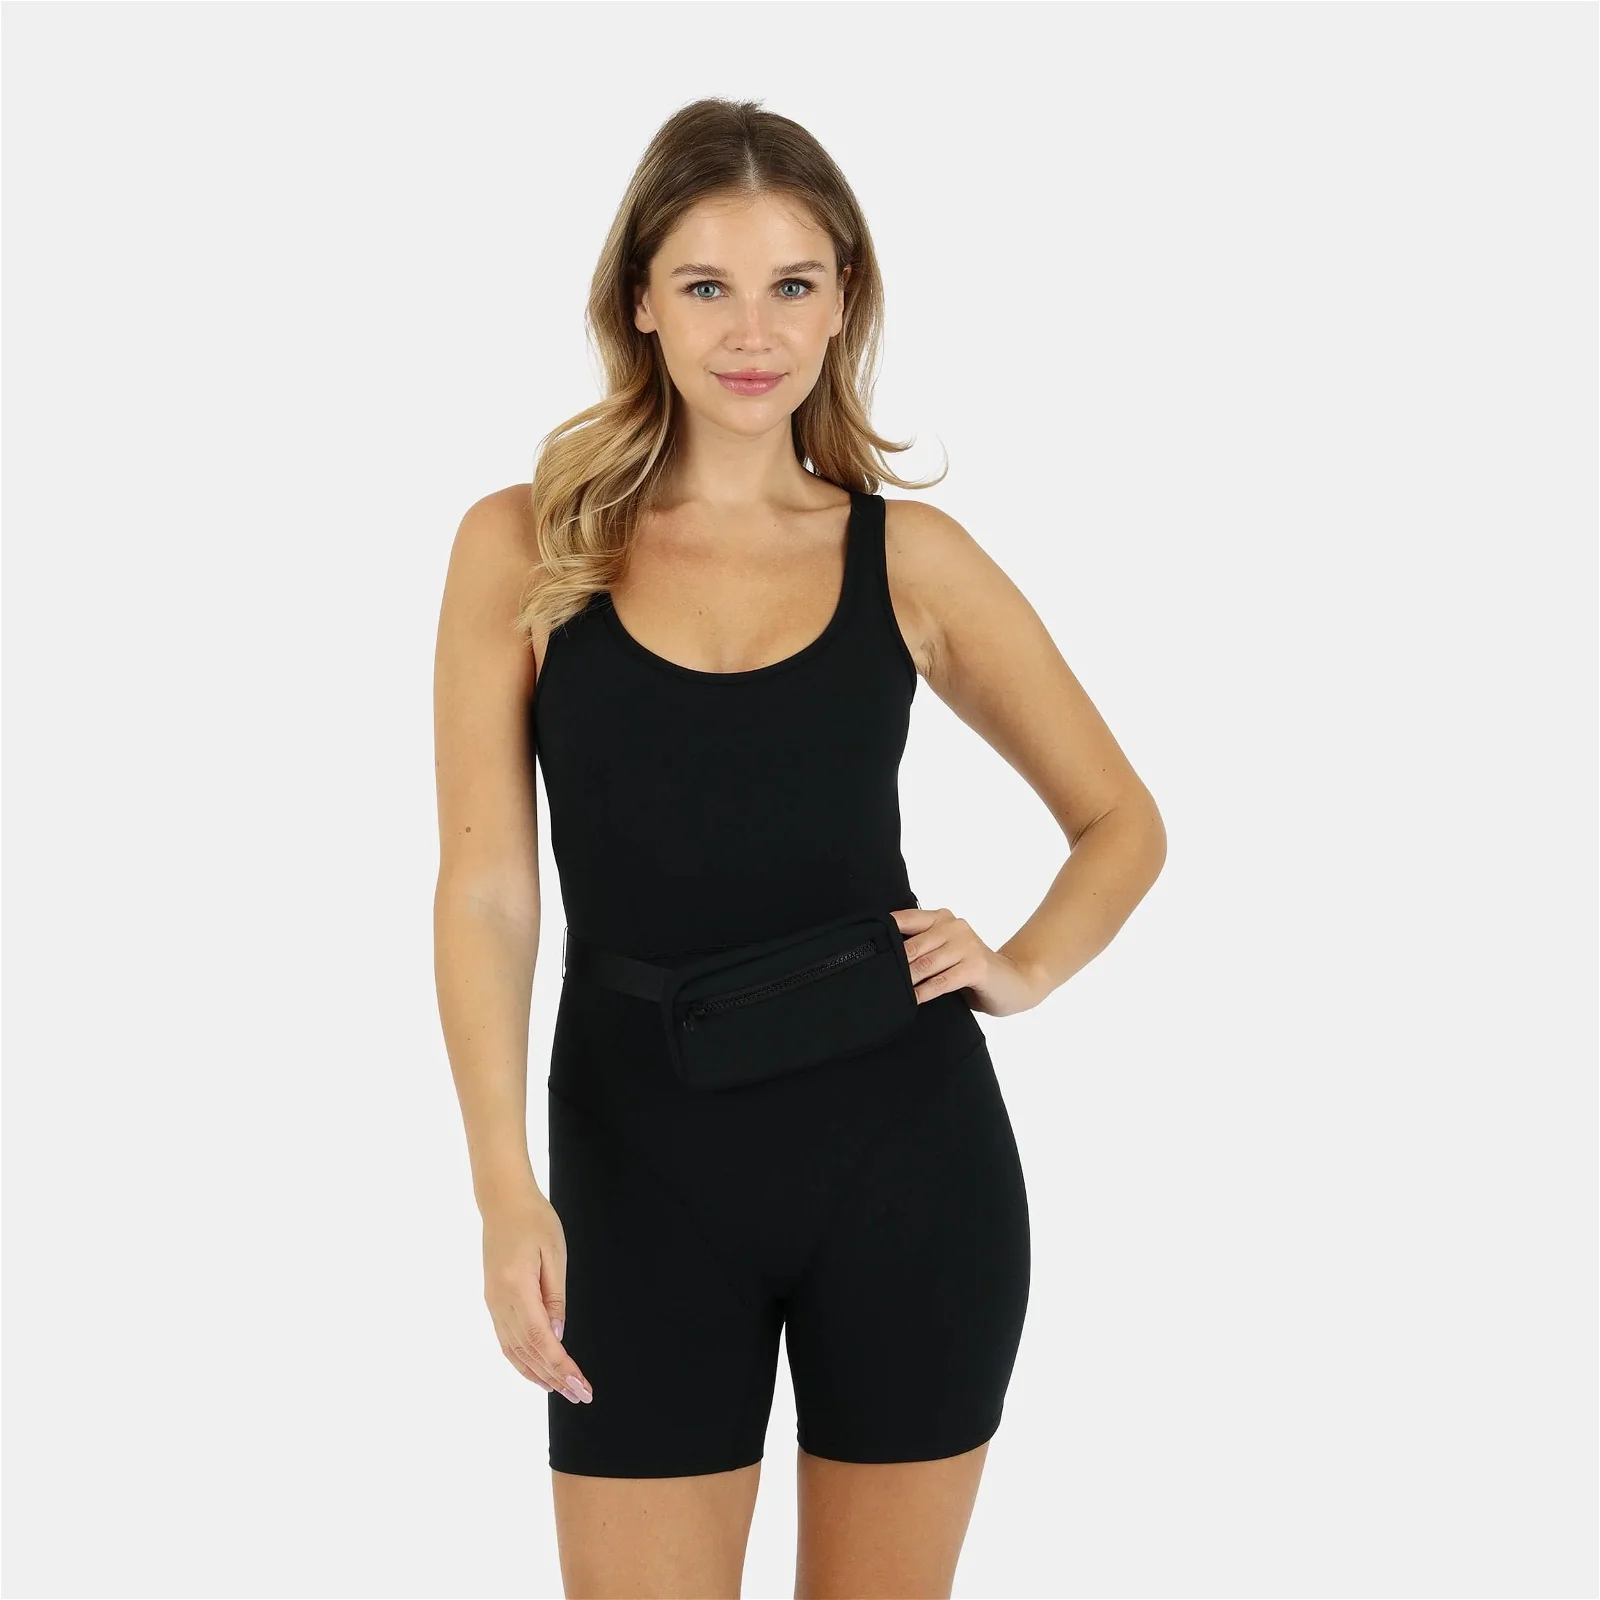 Image of All the Curves Jumper with Fanny Pack - Black